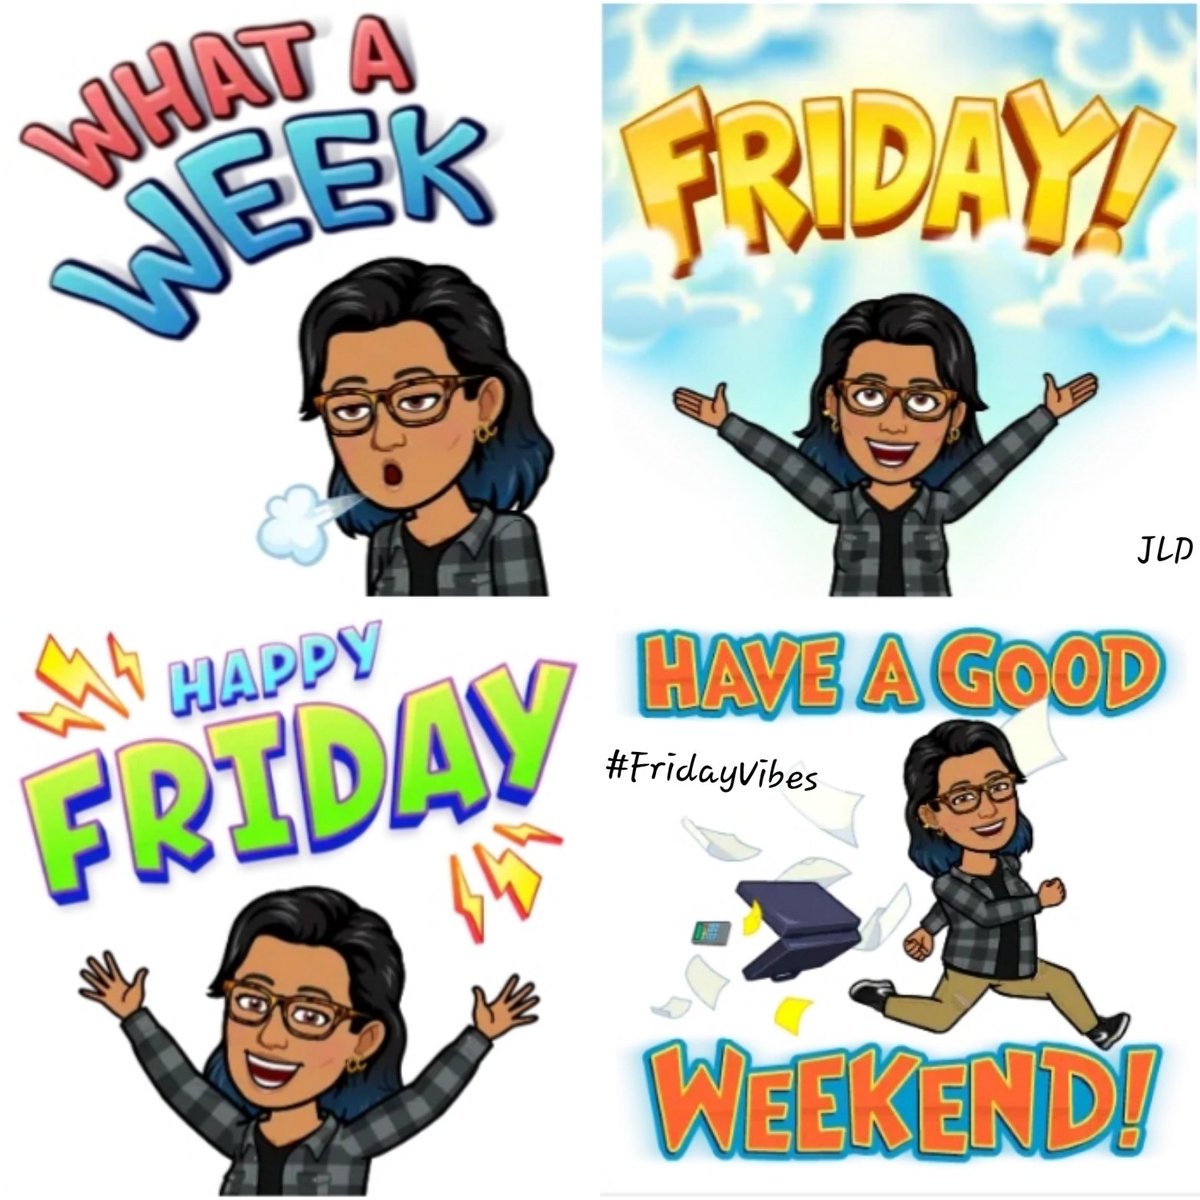 Annoying wk it was, FINALLY, its Friday!.😎
Soo, cold, need some sun.
It's #NationalMovieNight Pop some popcorn, grab a blanket & your favorite bud, put away the cell phones & tablets, get cozy & que up a line of movies for a fun night of entertainment.🍿🍫🥤🍹📲
#FridayMood